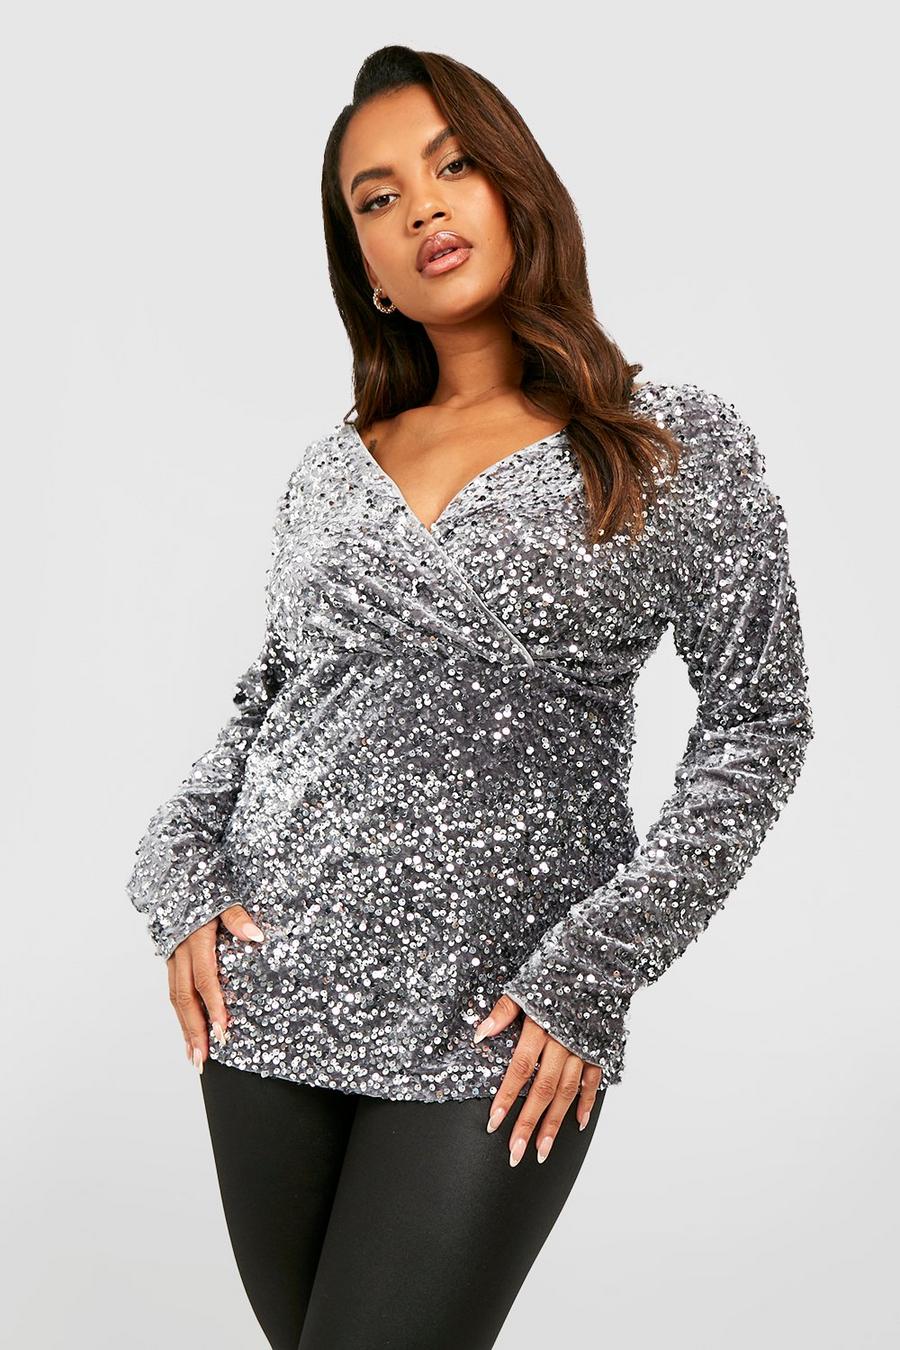 Silver Sequins Leggings  Affordable Trendy and Modest Clothing